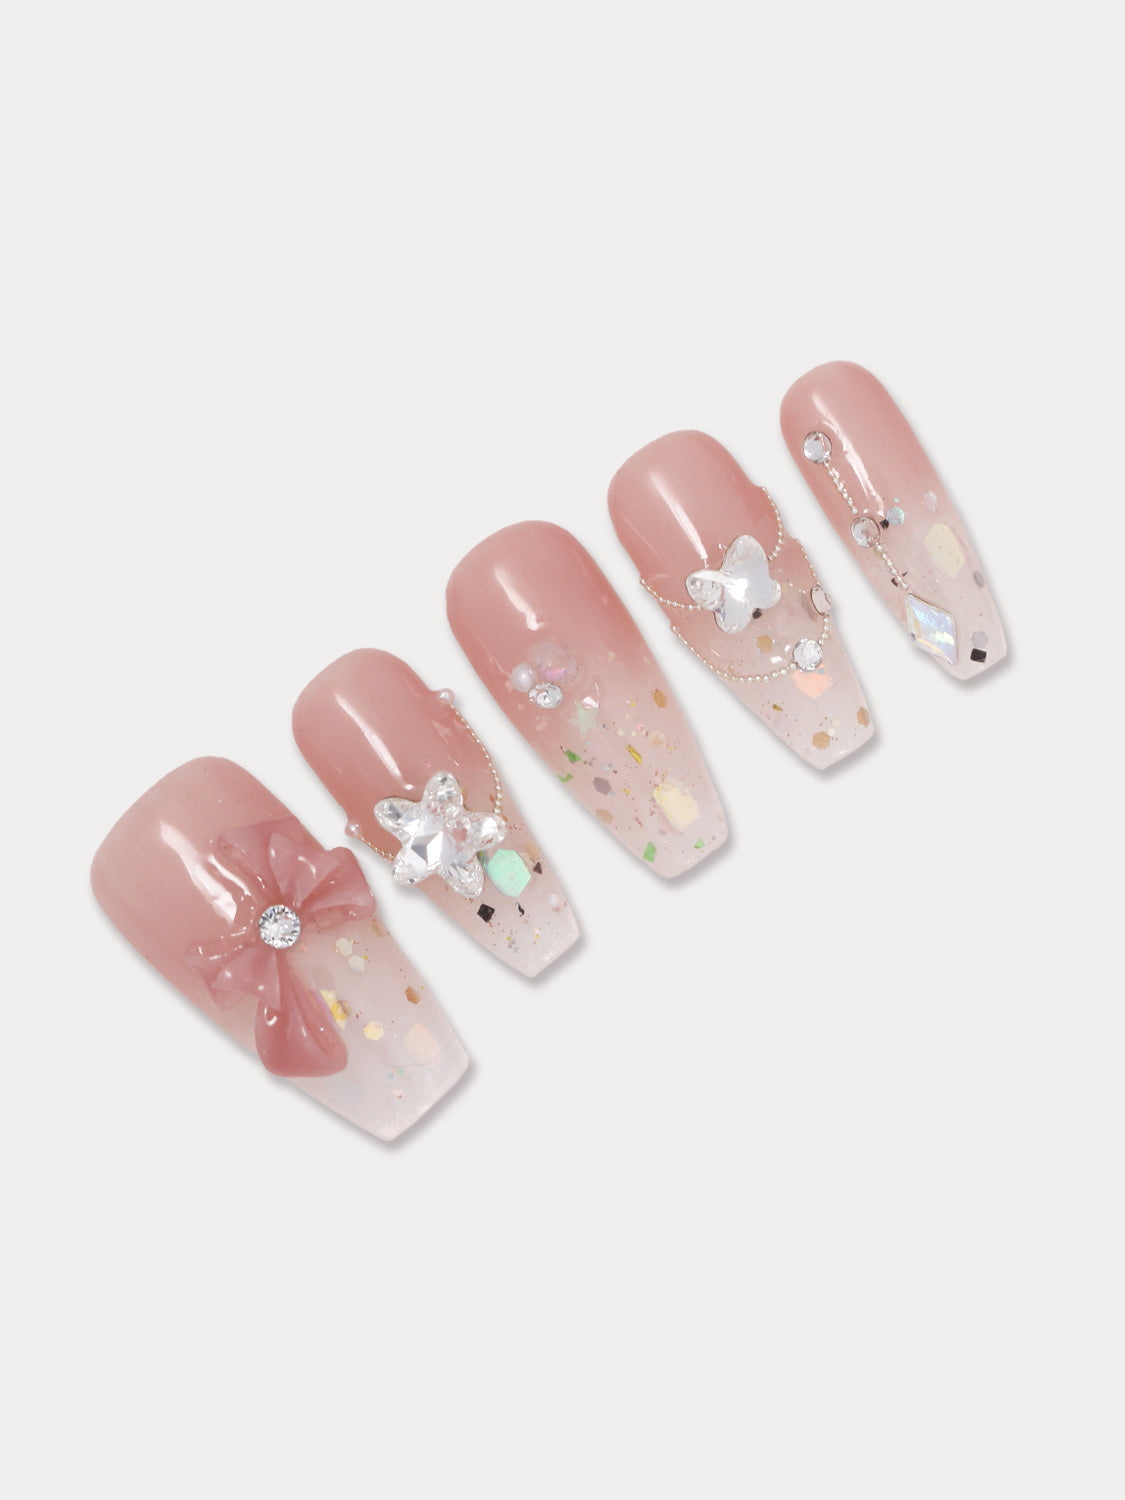 MIEAP summer candy press on nail for a burst of sweet, colorful vibes! This set features a peachy pink to transparent ombre with holographic glitter and handcrafted Swarovski rhinestones. Perfect for your sunny days. #MIEAPnails #pressonnail #acrylicnail #nails #nailart #naildesign #nailinspo #handmadenail #summernail #nail2023 #graduationnail #swarovskinail  #datingnail #promnail